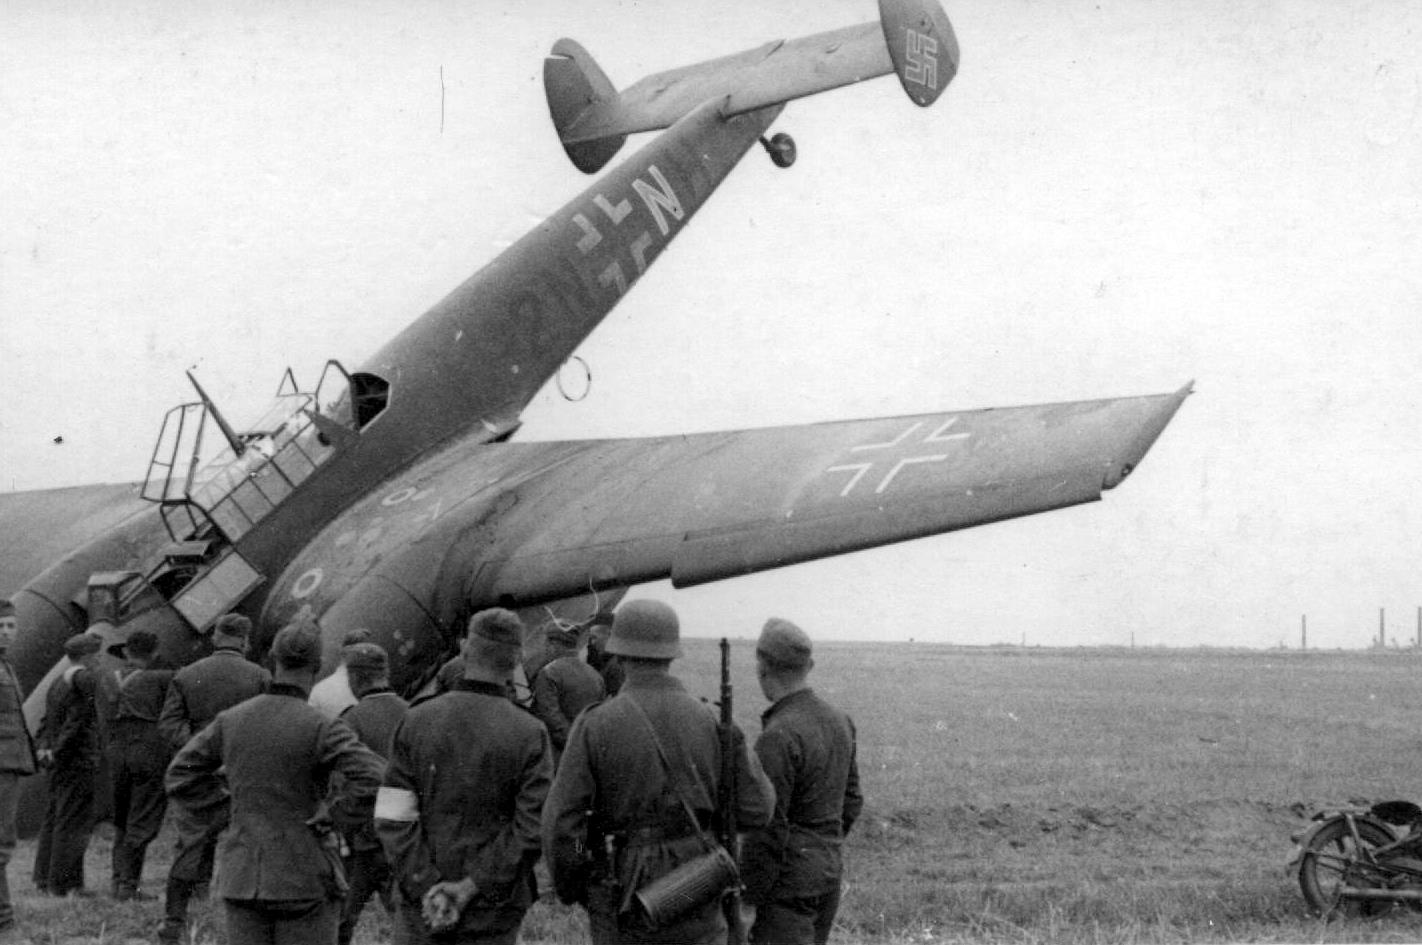 These types of accidents would mean replacement of the Bf 110s engines.